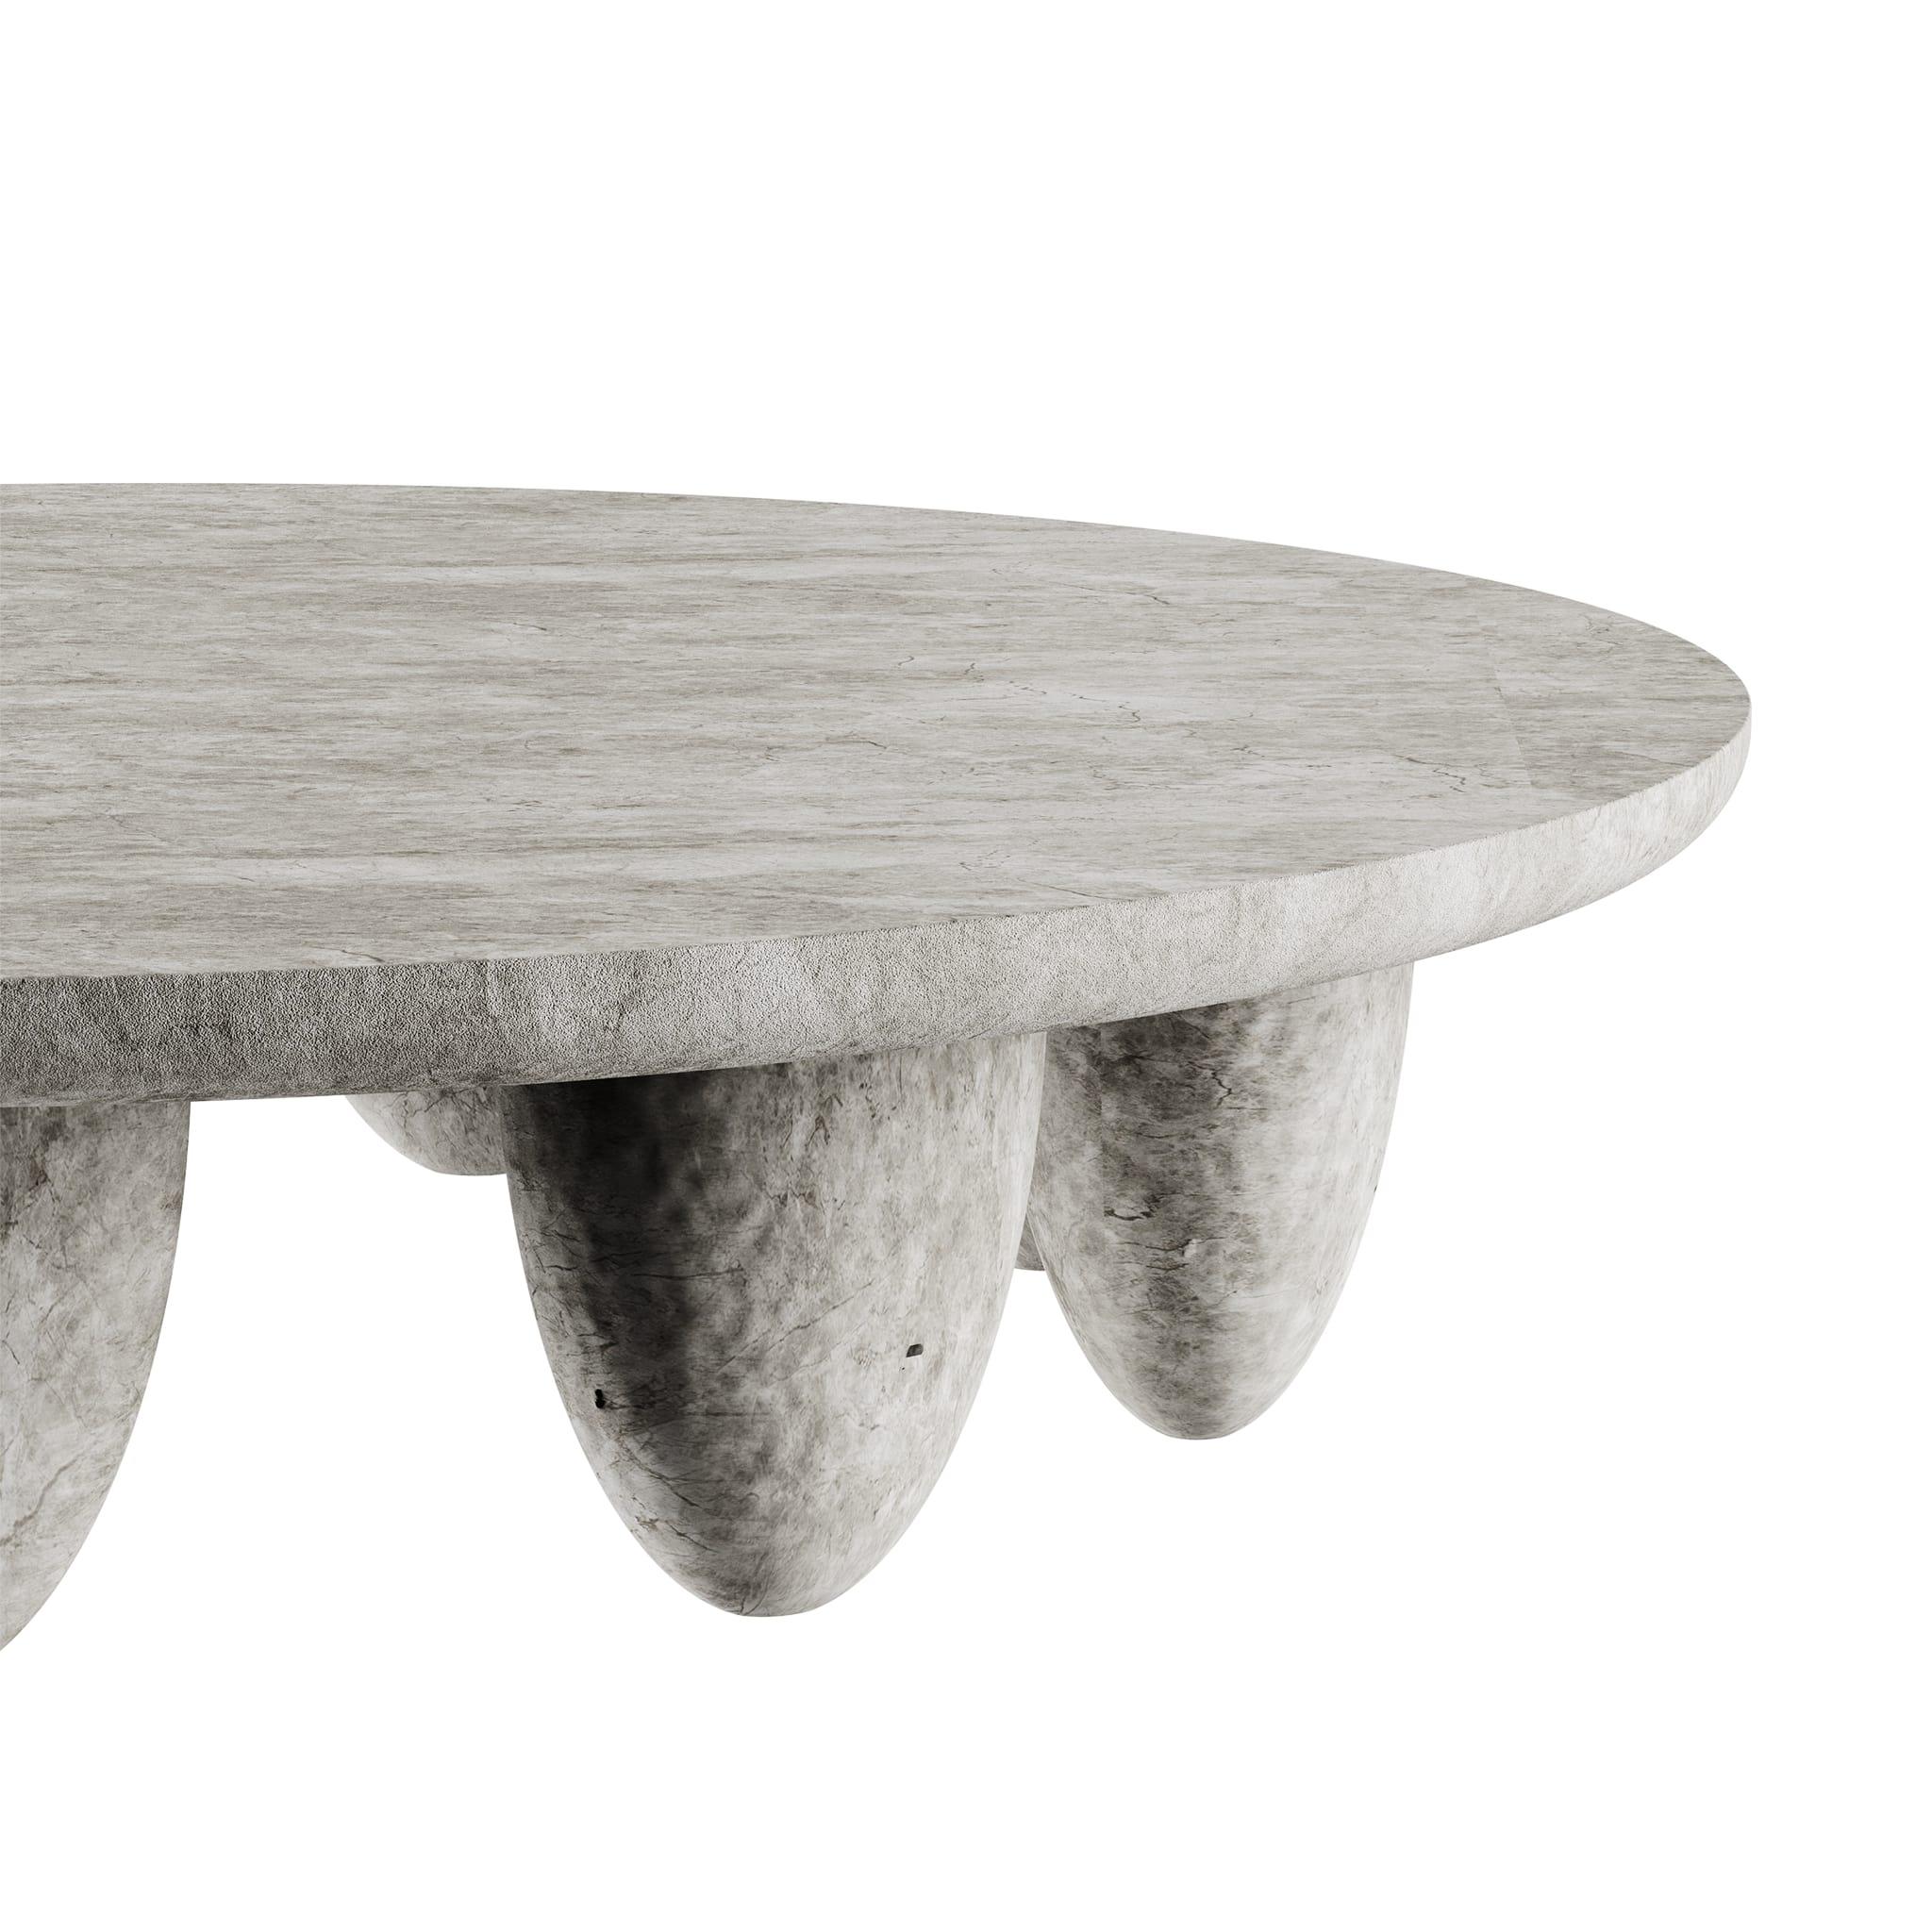 Organic Modern Contemporary Minimal Outdoor Indoor Round Center Table in Grigio Tundra Marble For Sale